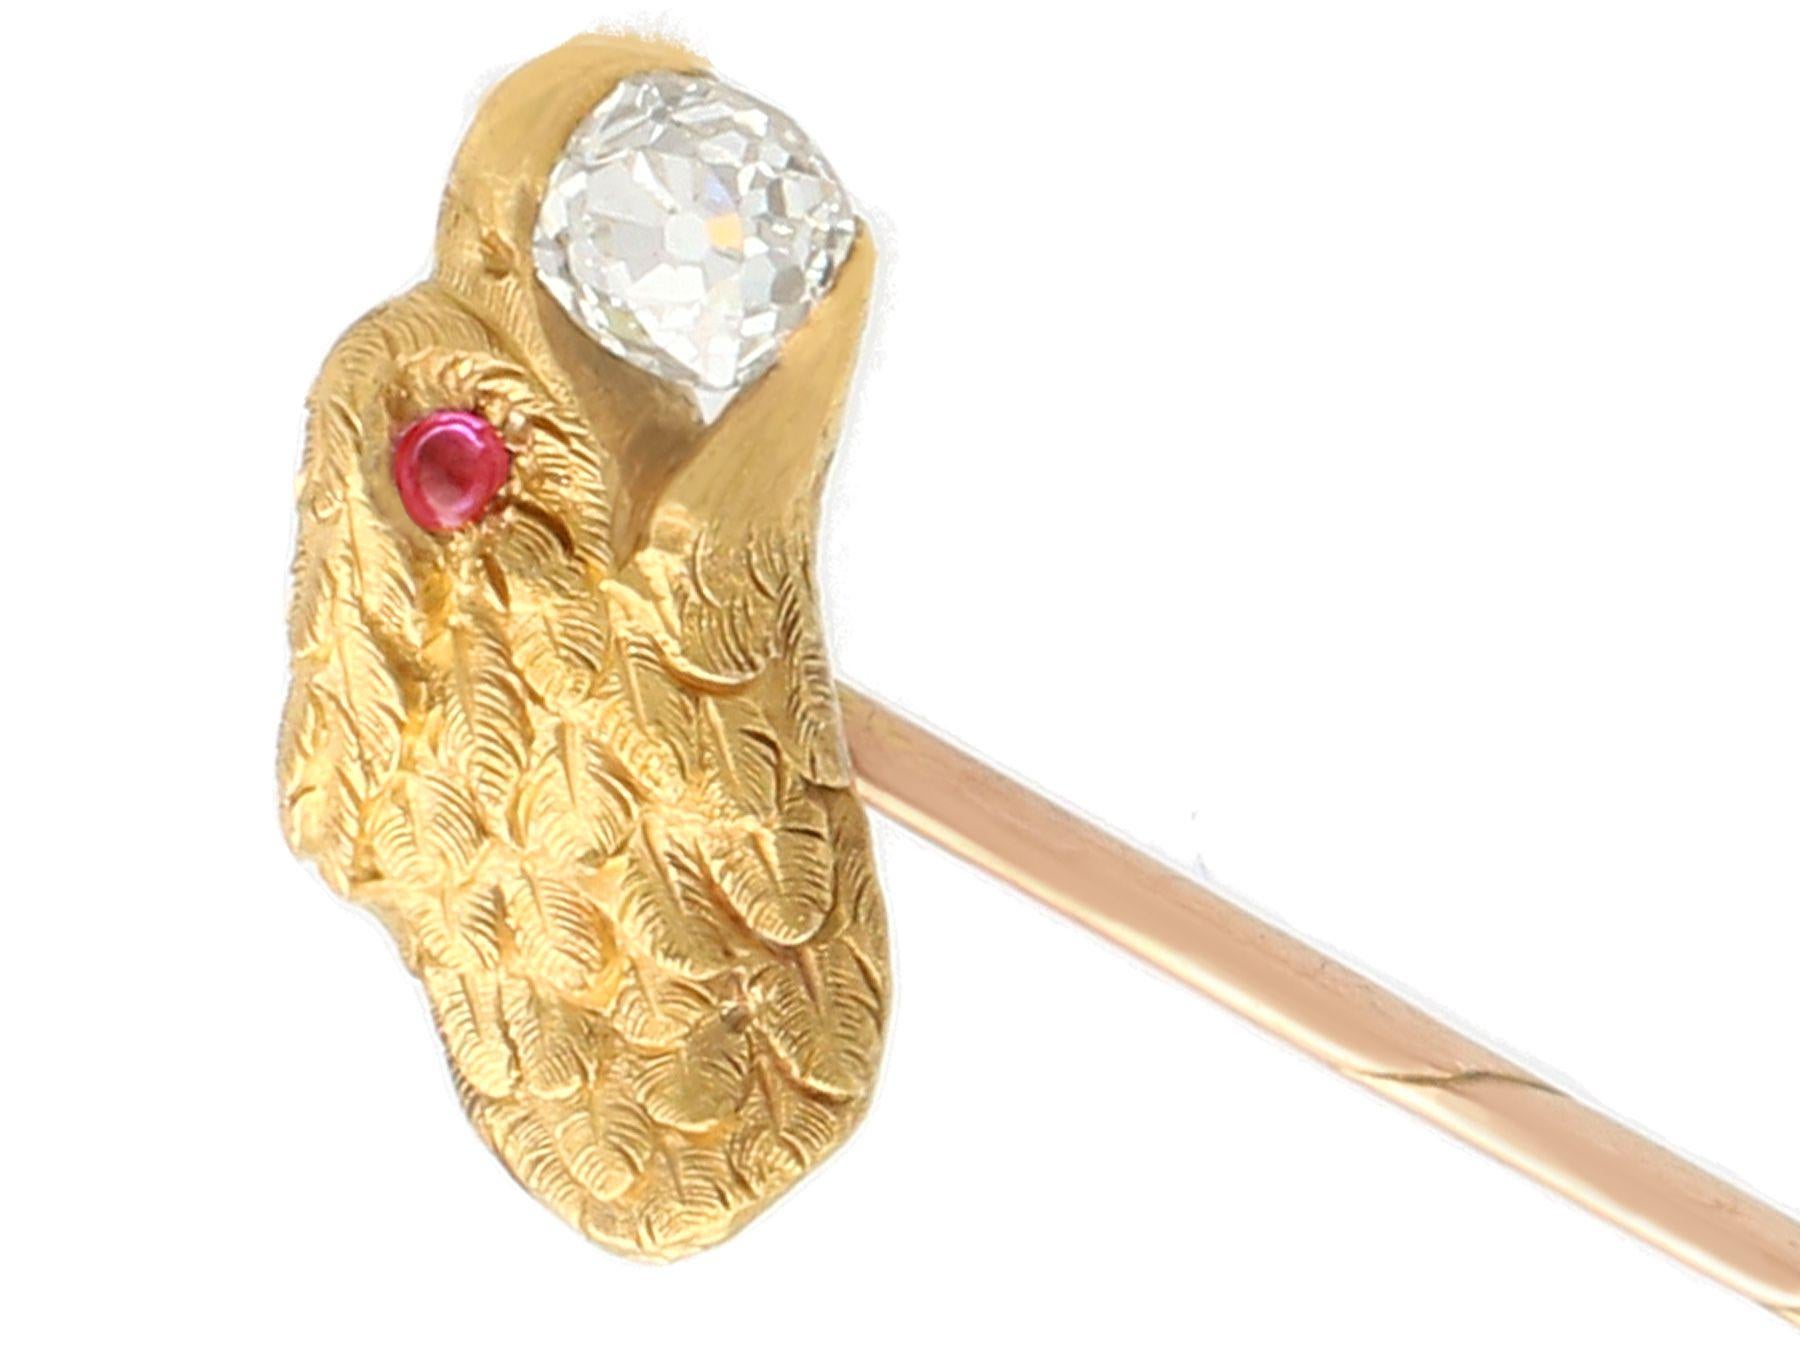 A fine and impressive 0.34 Ct diamond and 0.04 Ct ruby brooch in 21k and 14k yellow gold; part of our antique jewelry and estate jewelry collections.

This fine and impressive Victorian brooch has been crafted in 21k yellow gold with a 14k yellow